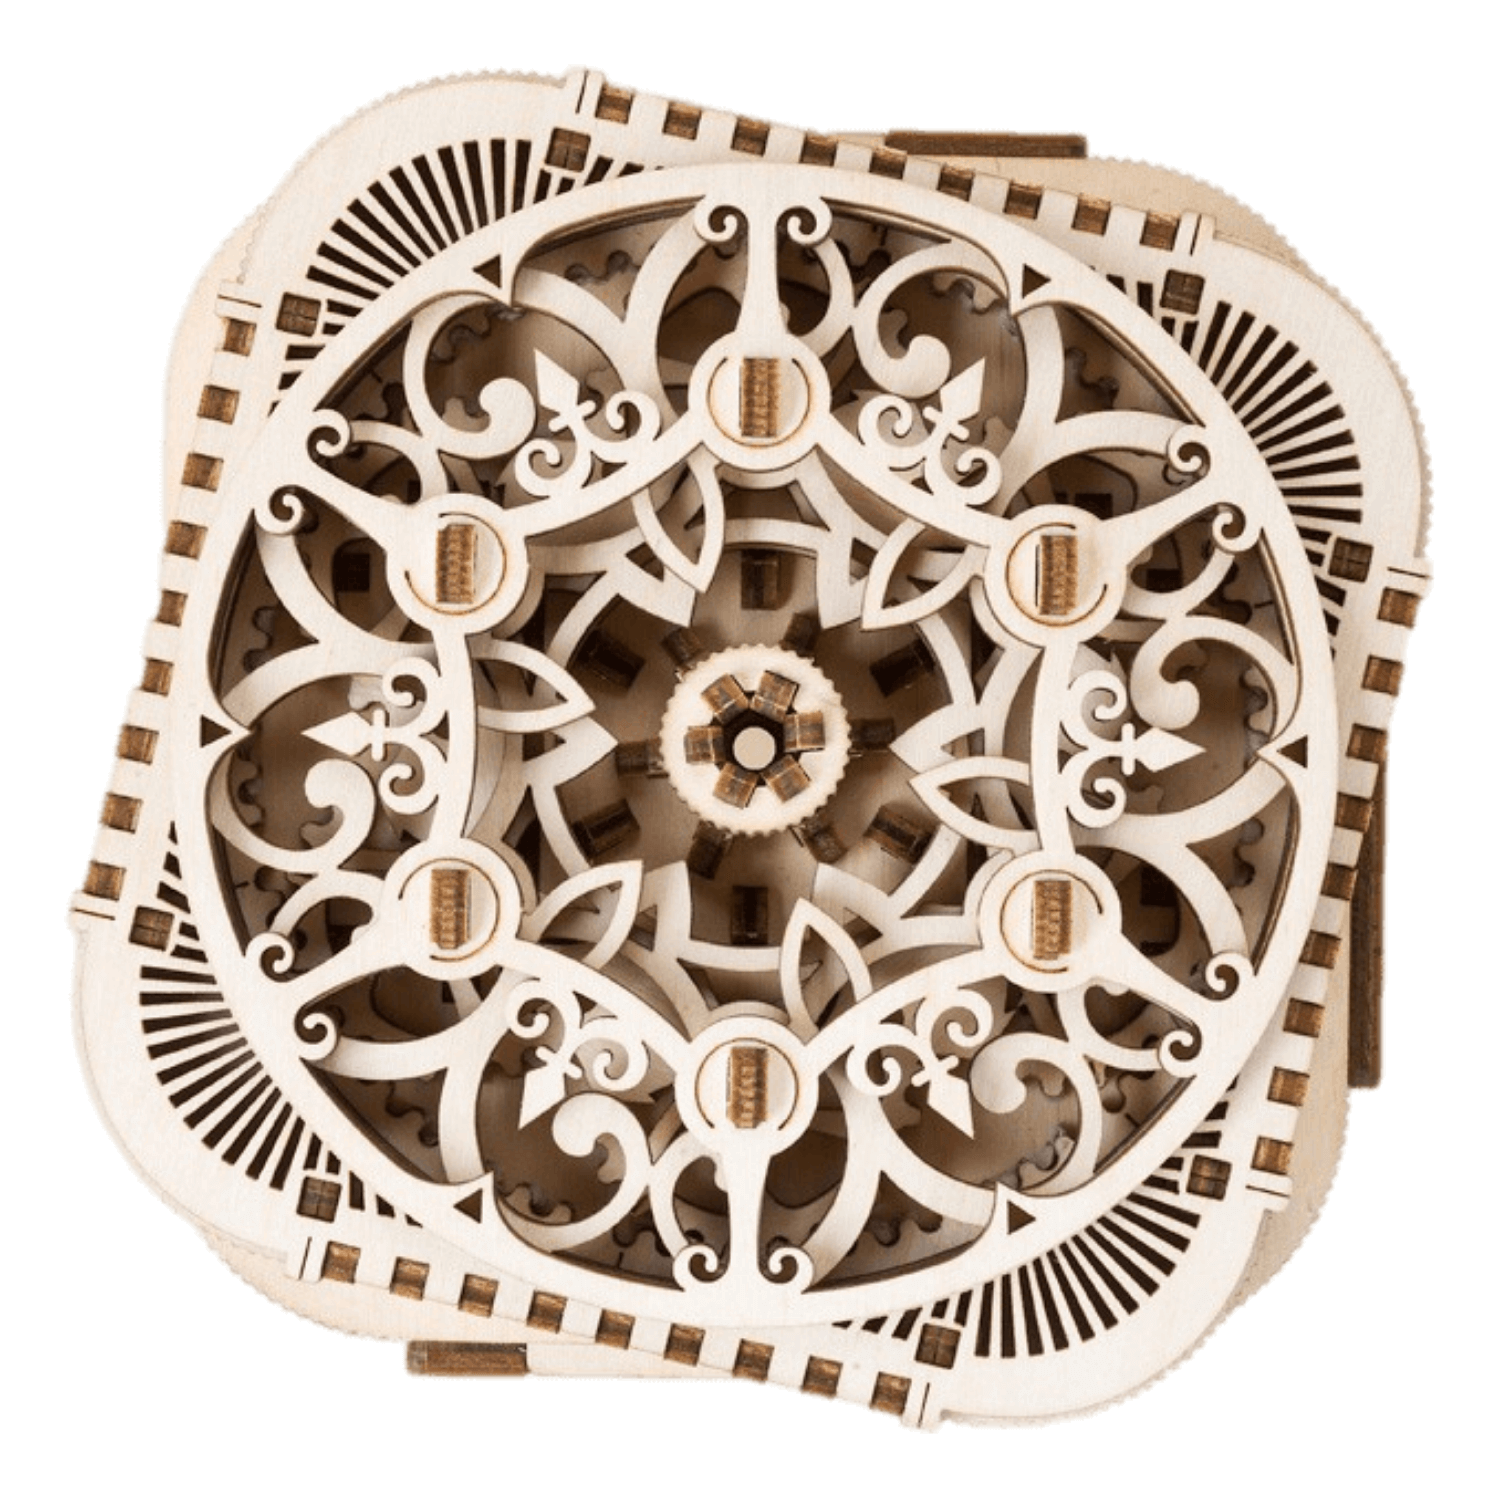 Treasure Chest Mechanical Wooden Puzzle Ugears--